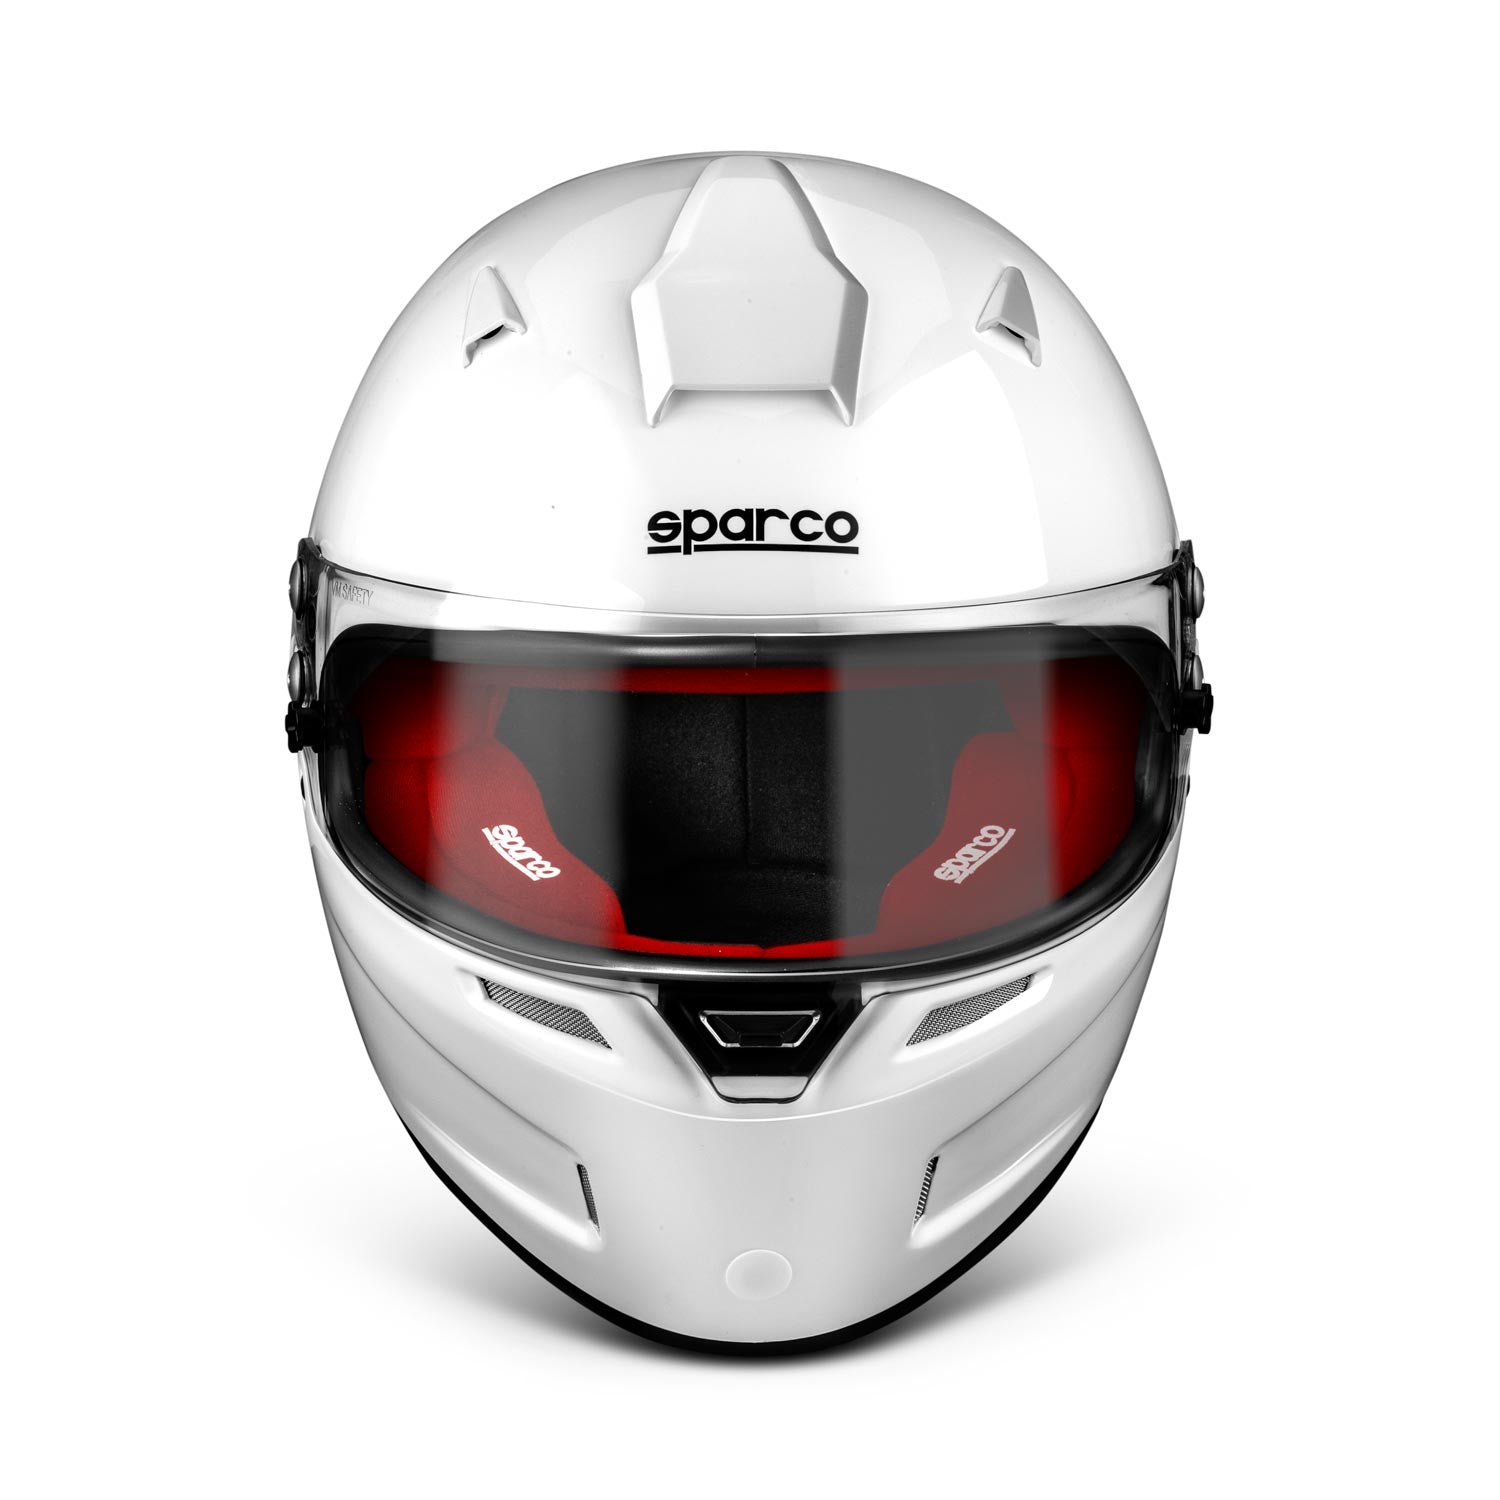 SPARCO 003375BIRS1S RF-5W Racing helmet, FIA/SNELL SA2020, white/red, size S (55-56) Photo-0 